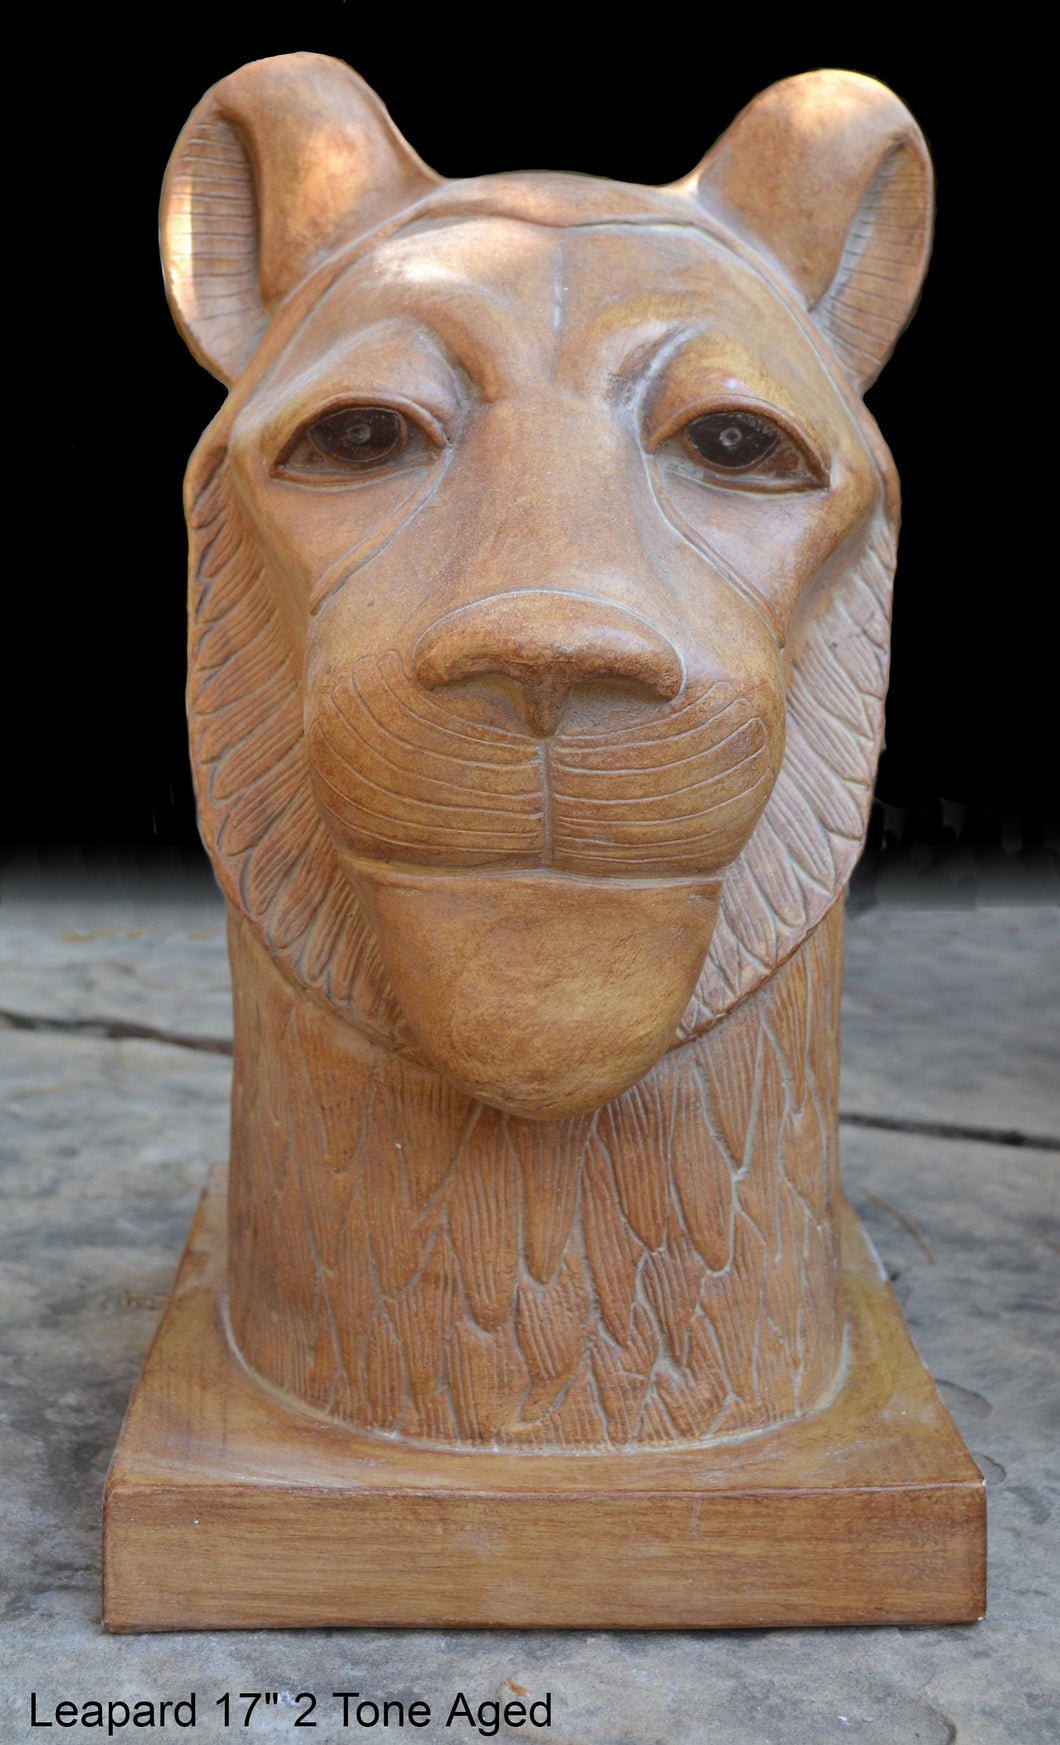 History Egyptian Tut Leopard bust Sculpture 17" www.Neo-Mfg.com home decor statue grand scale